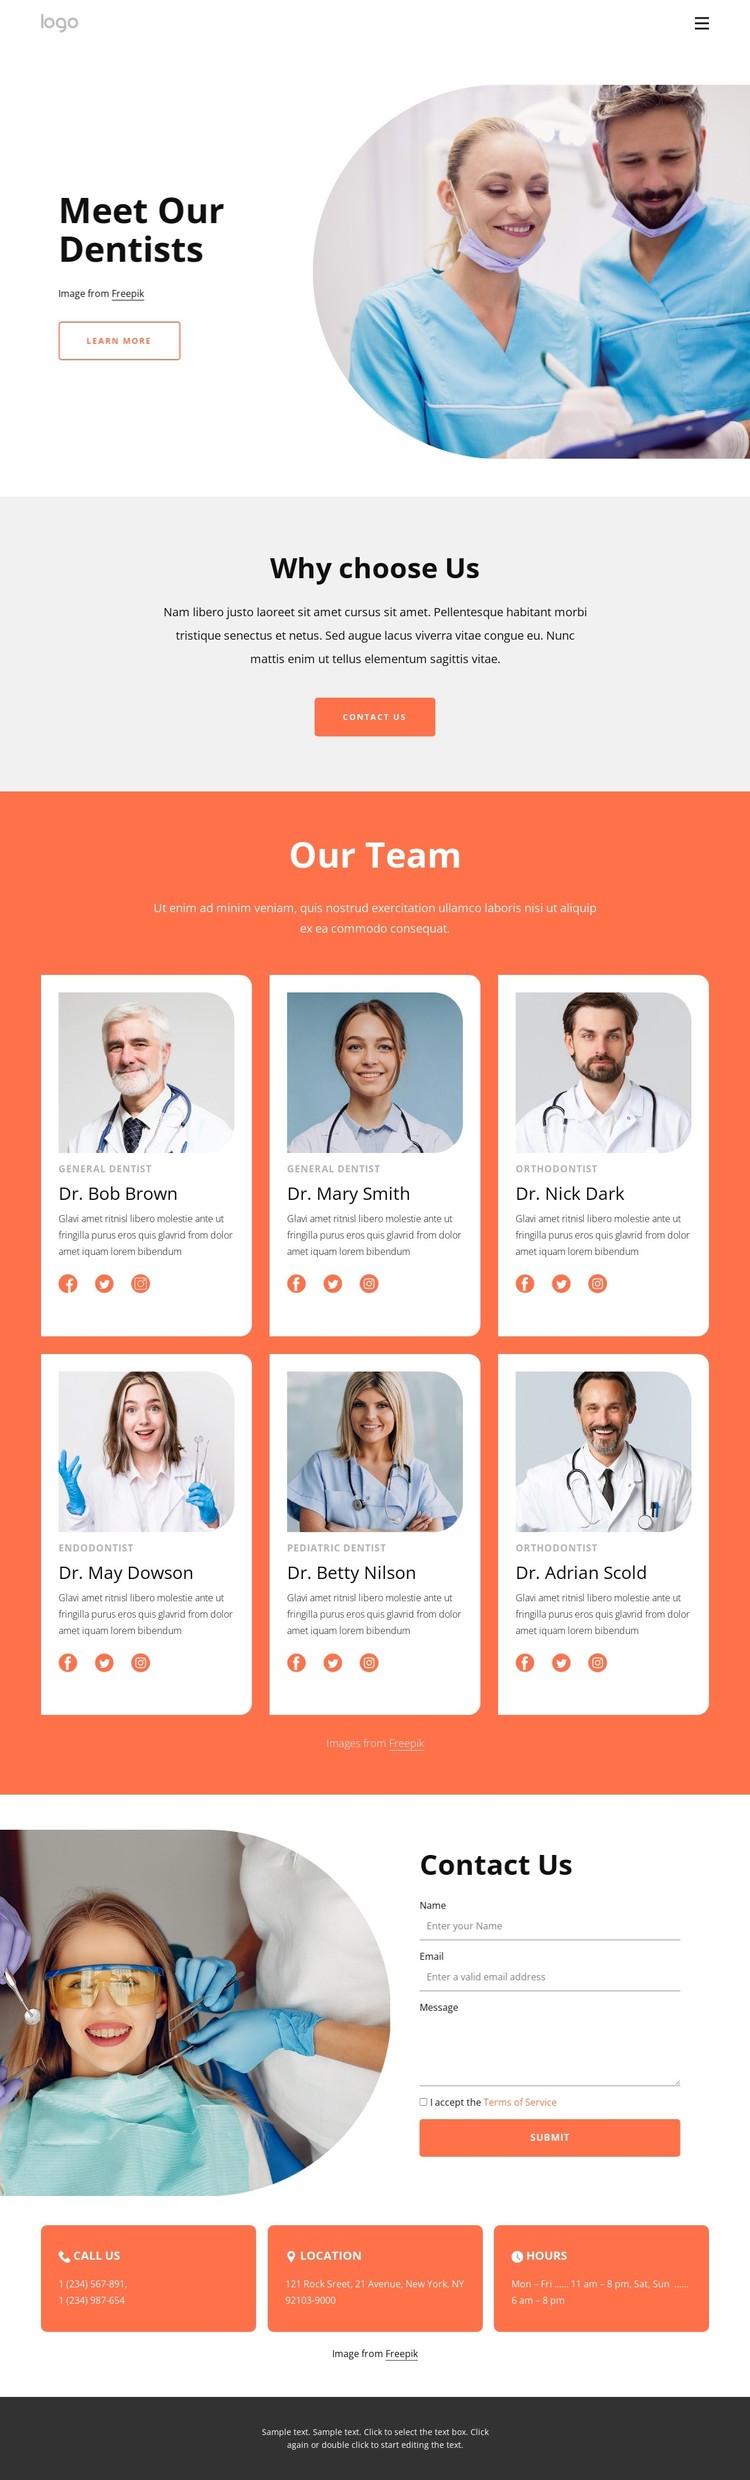 Highly-qualified dentists Static Site Generator